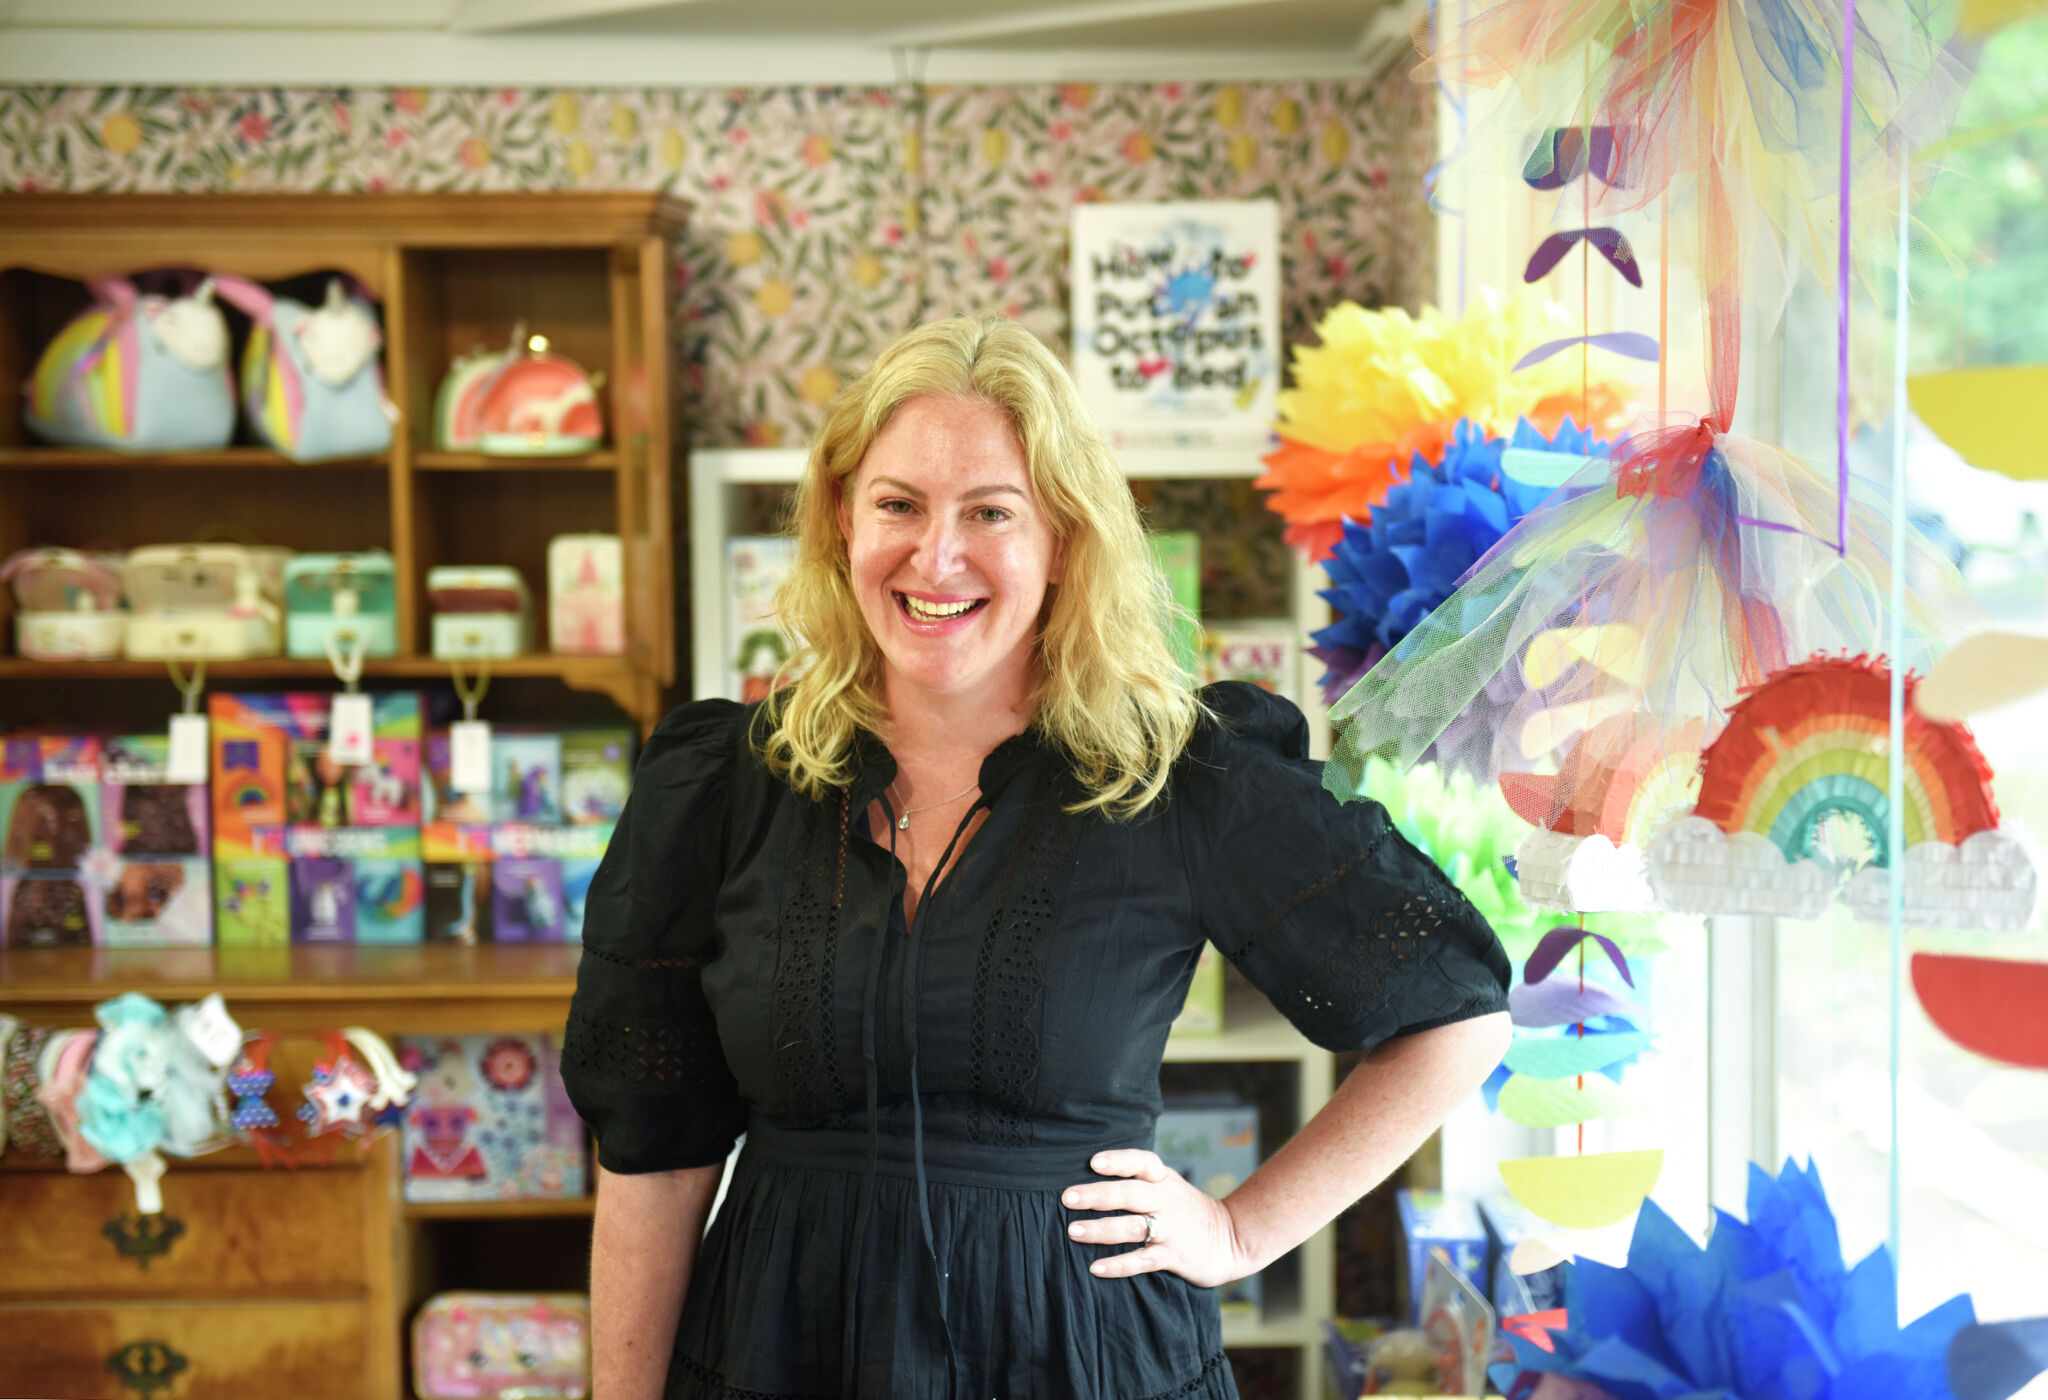 Wild Child toy store brings whimsy to the retail scene in Wilton